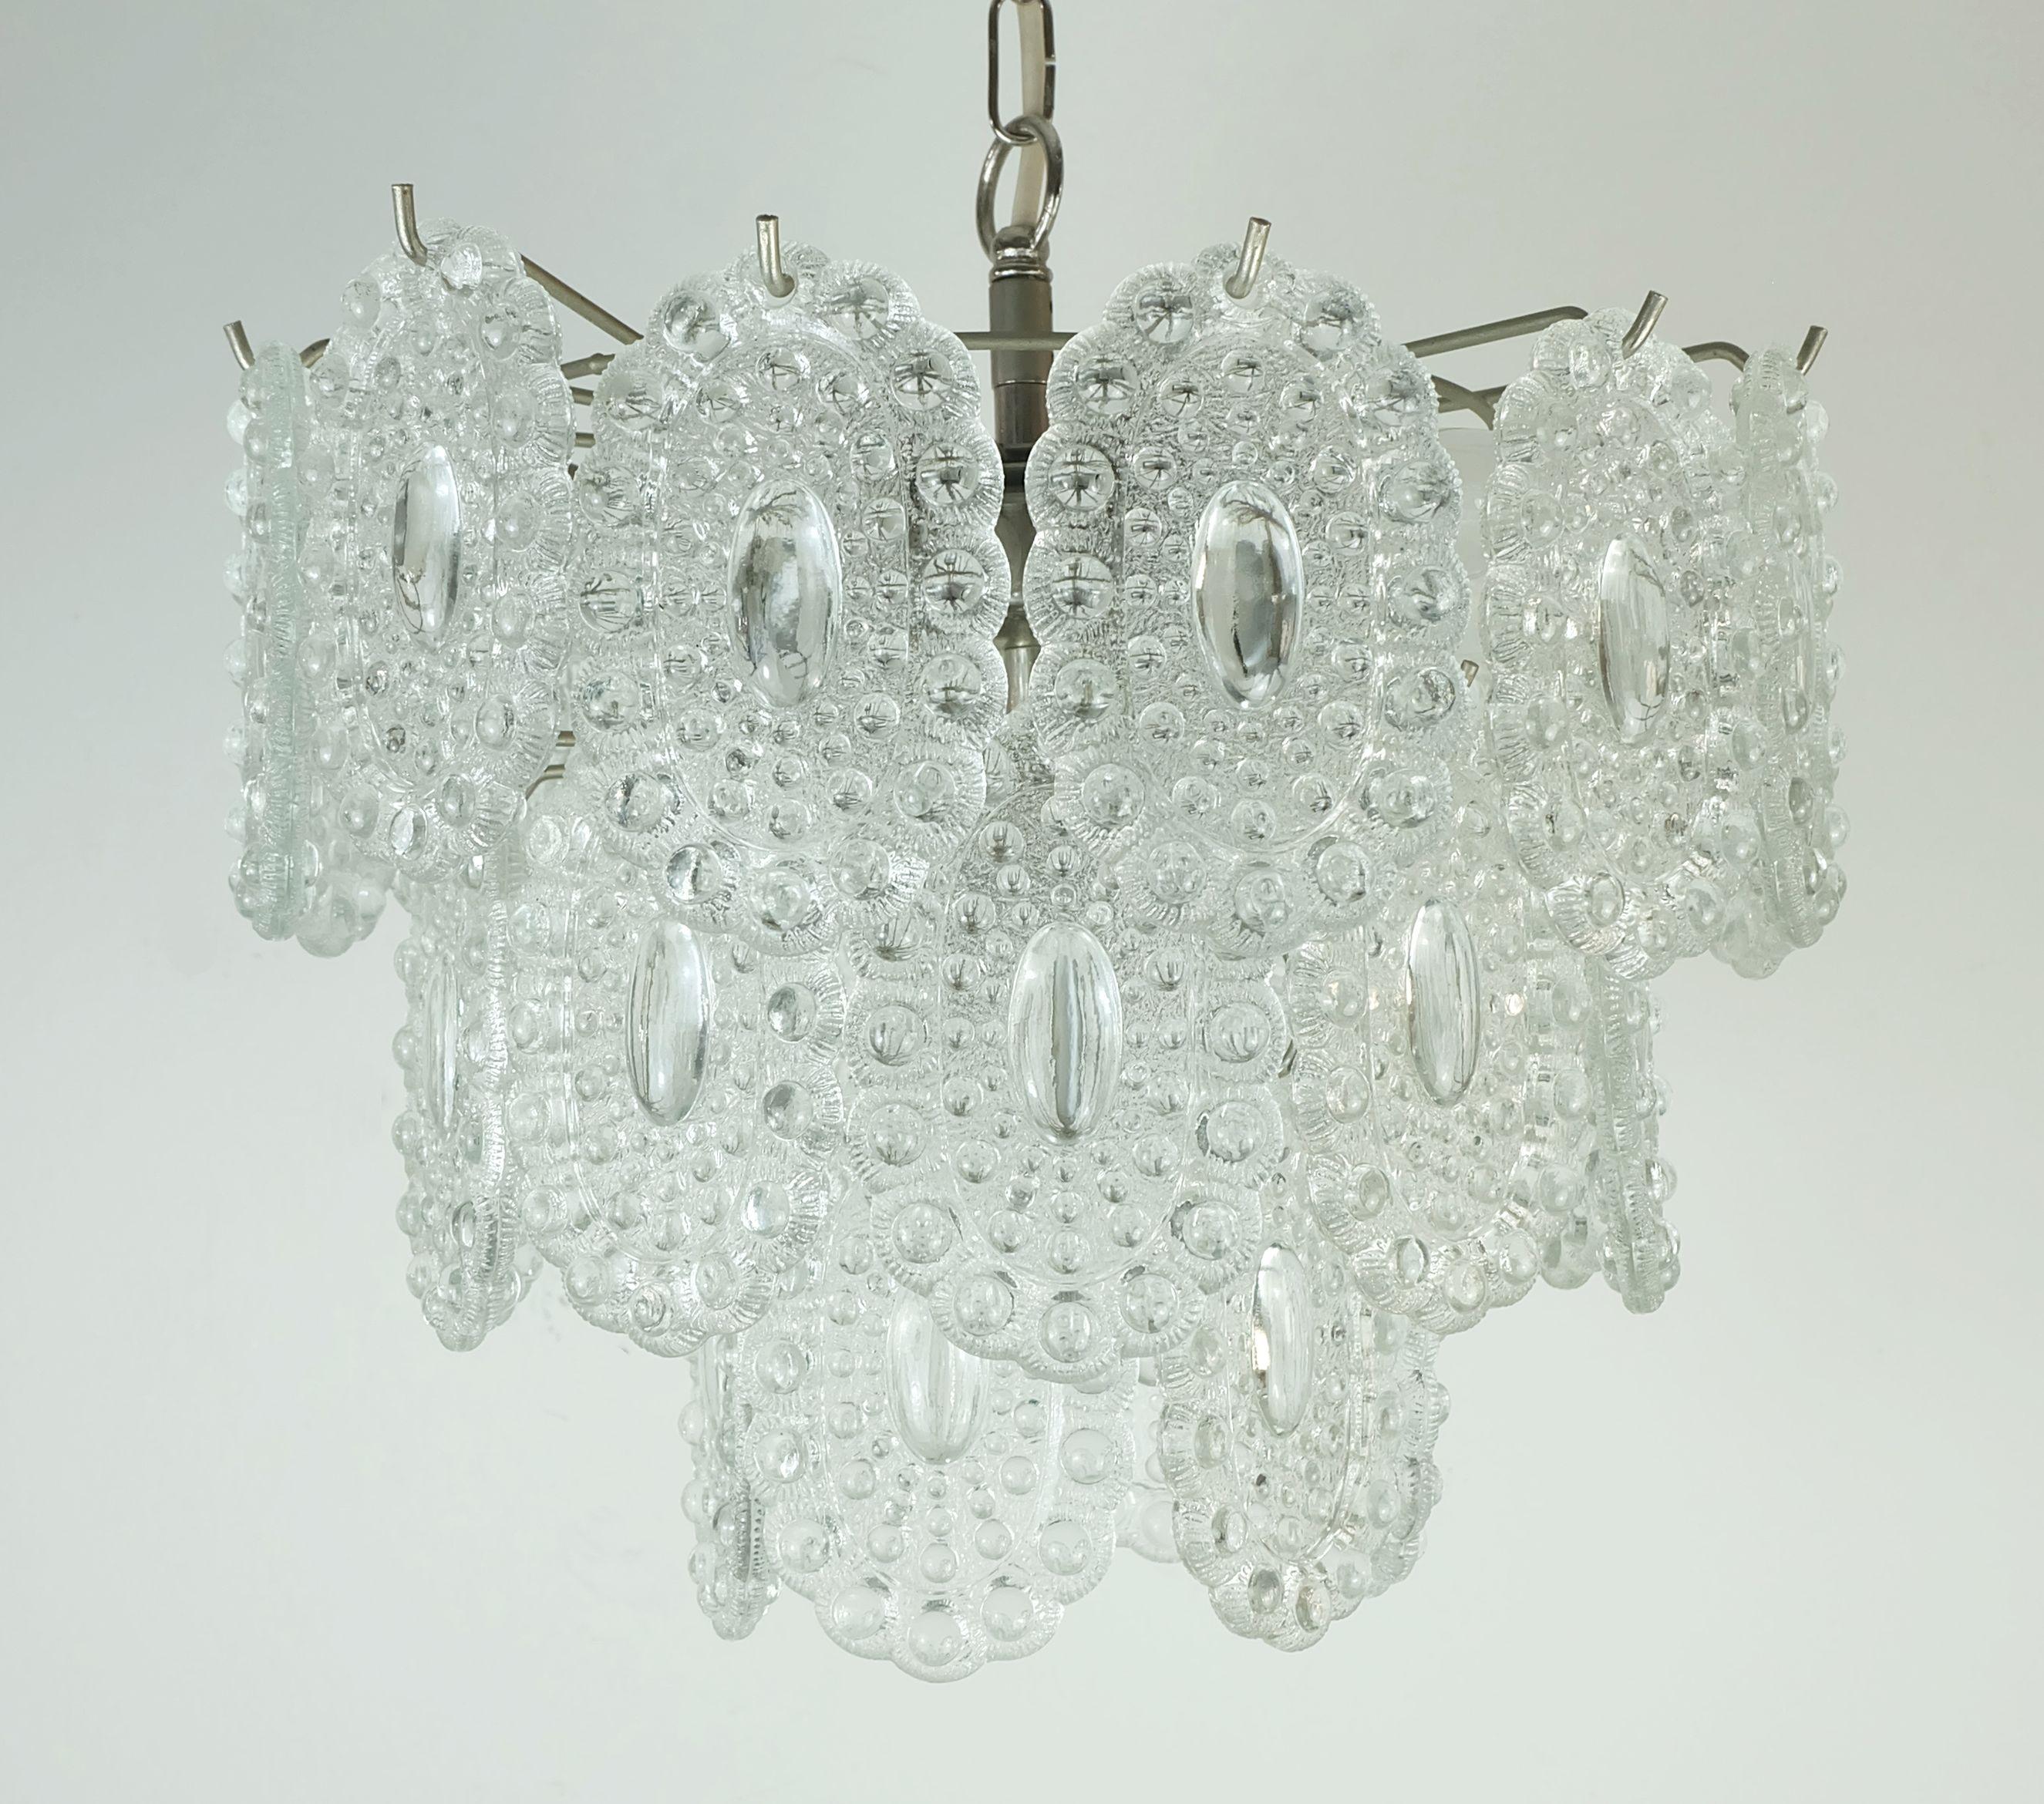 Beautiful vintage glass chandelier / hanging lamp from the 1960s to 70s with 29 oval glass discs with a textured surface. The frame is made of silver-colored metal. At the bottom in the middle there is a socket for an E27 light bulb, above it in a